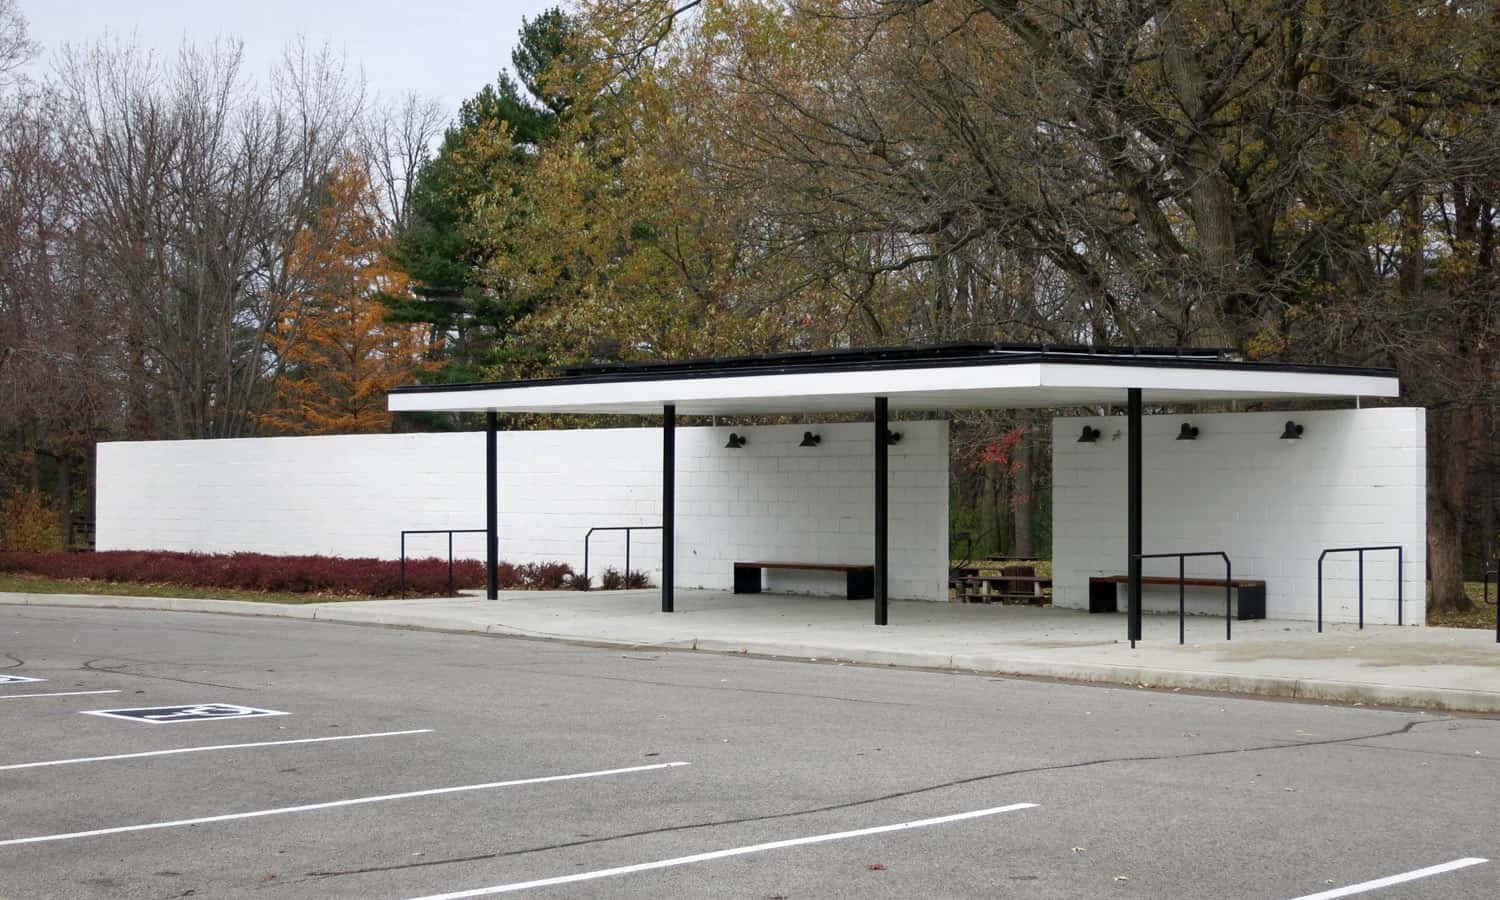 Bus stop pavilion located to the north of the main parking lot